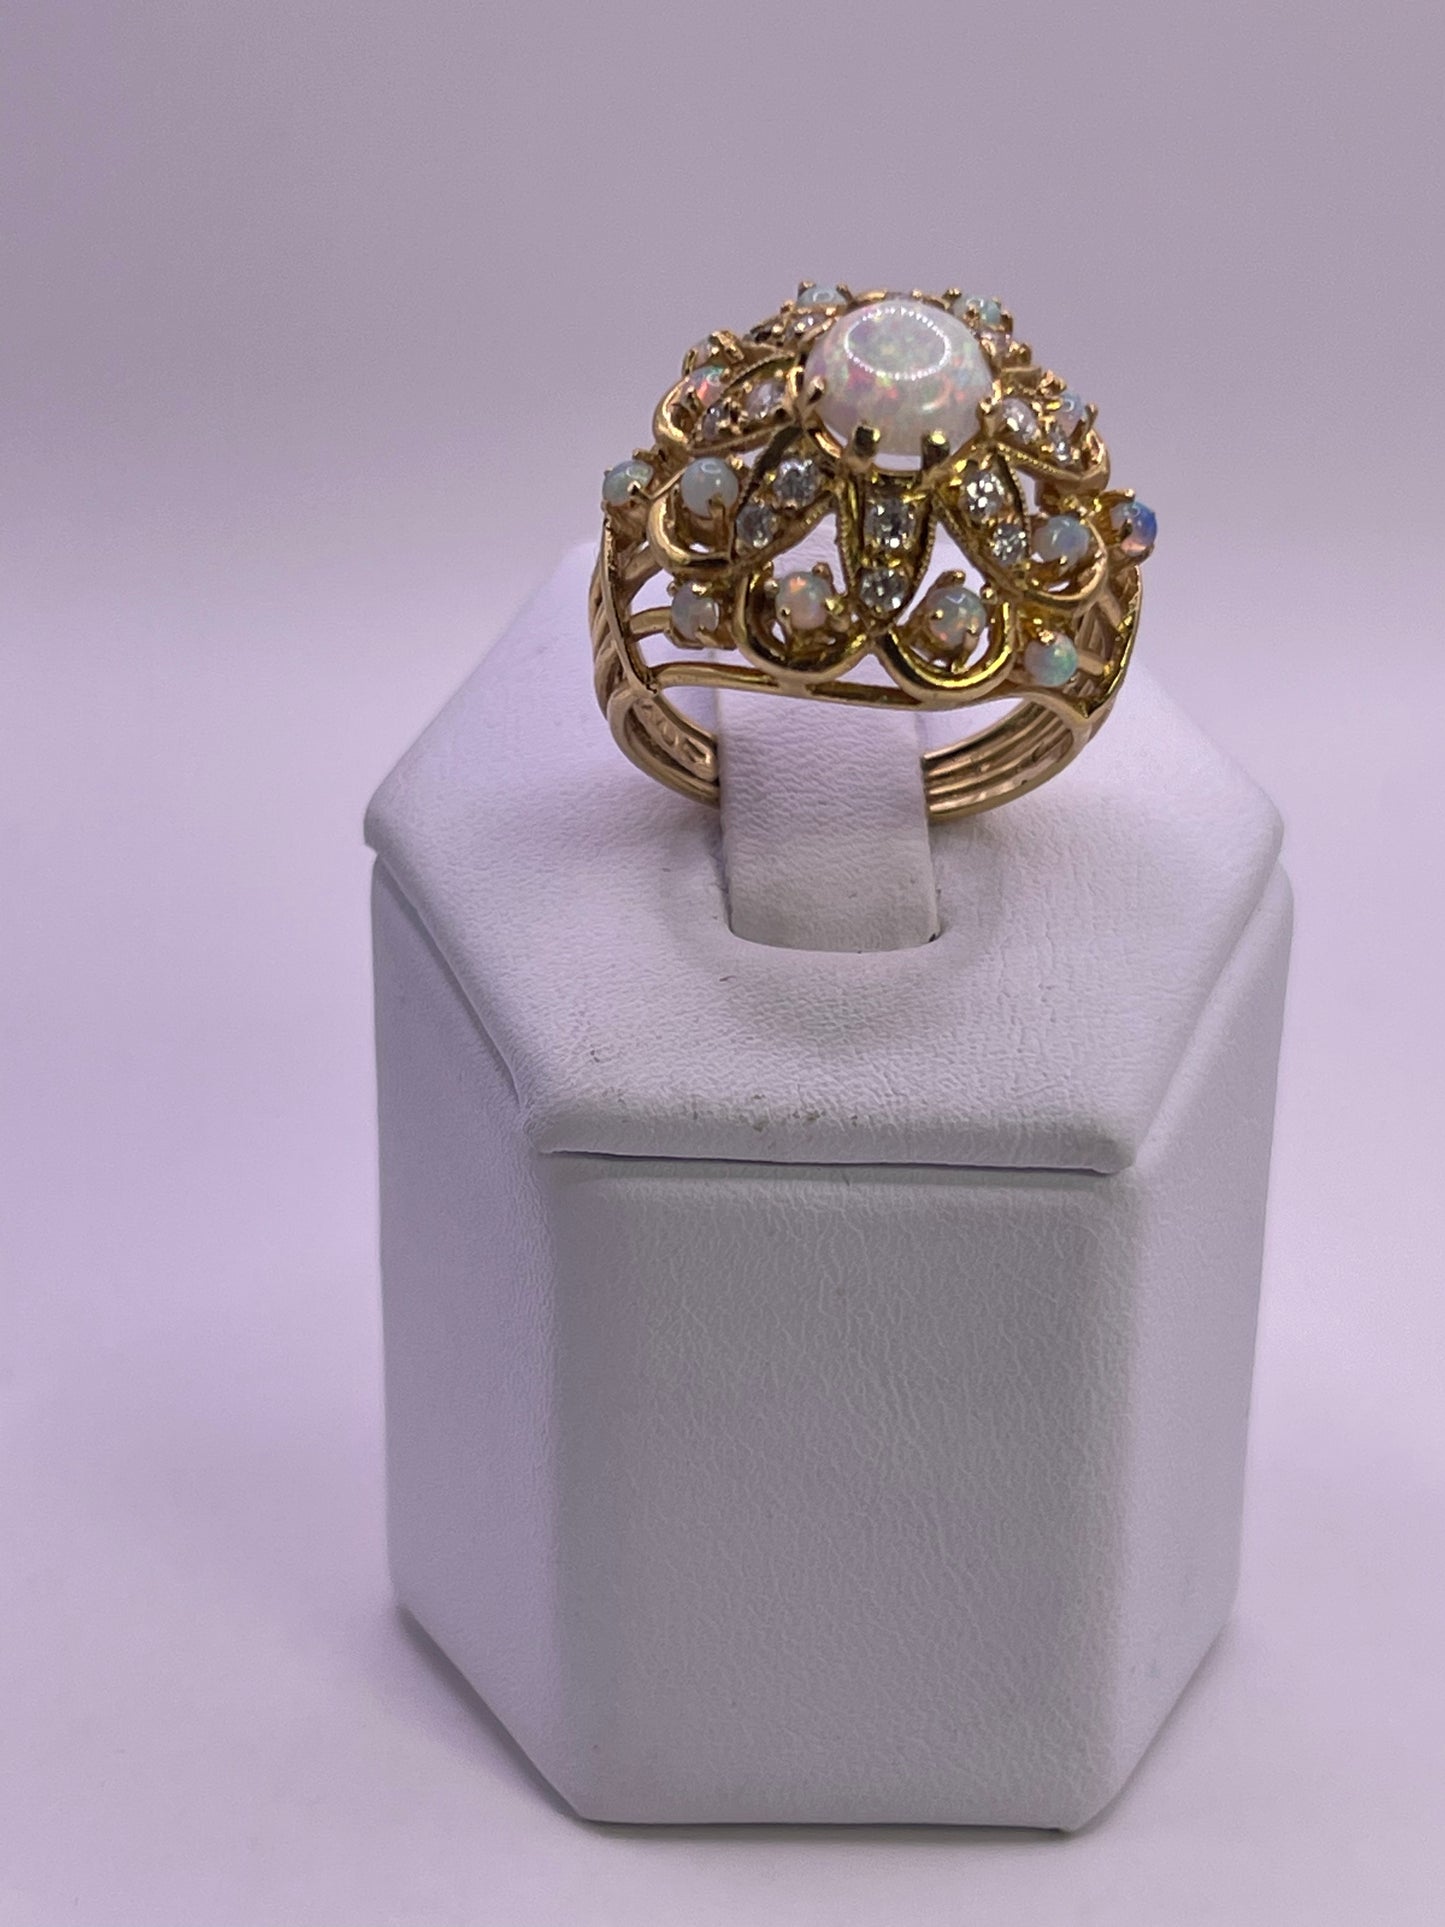 Opal, diamond and gold ring am